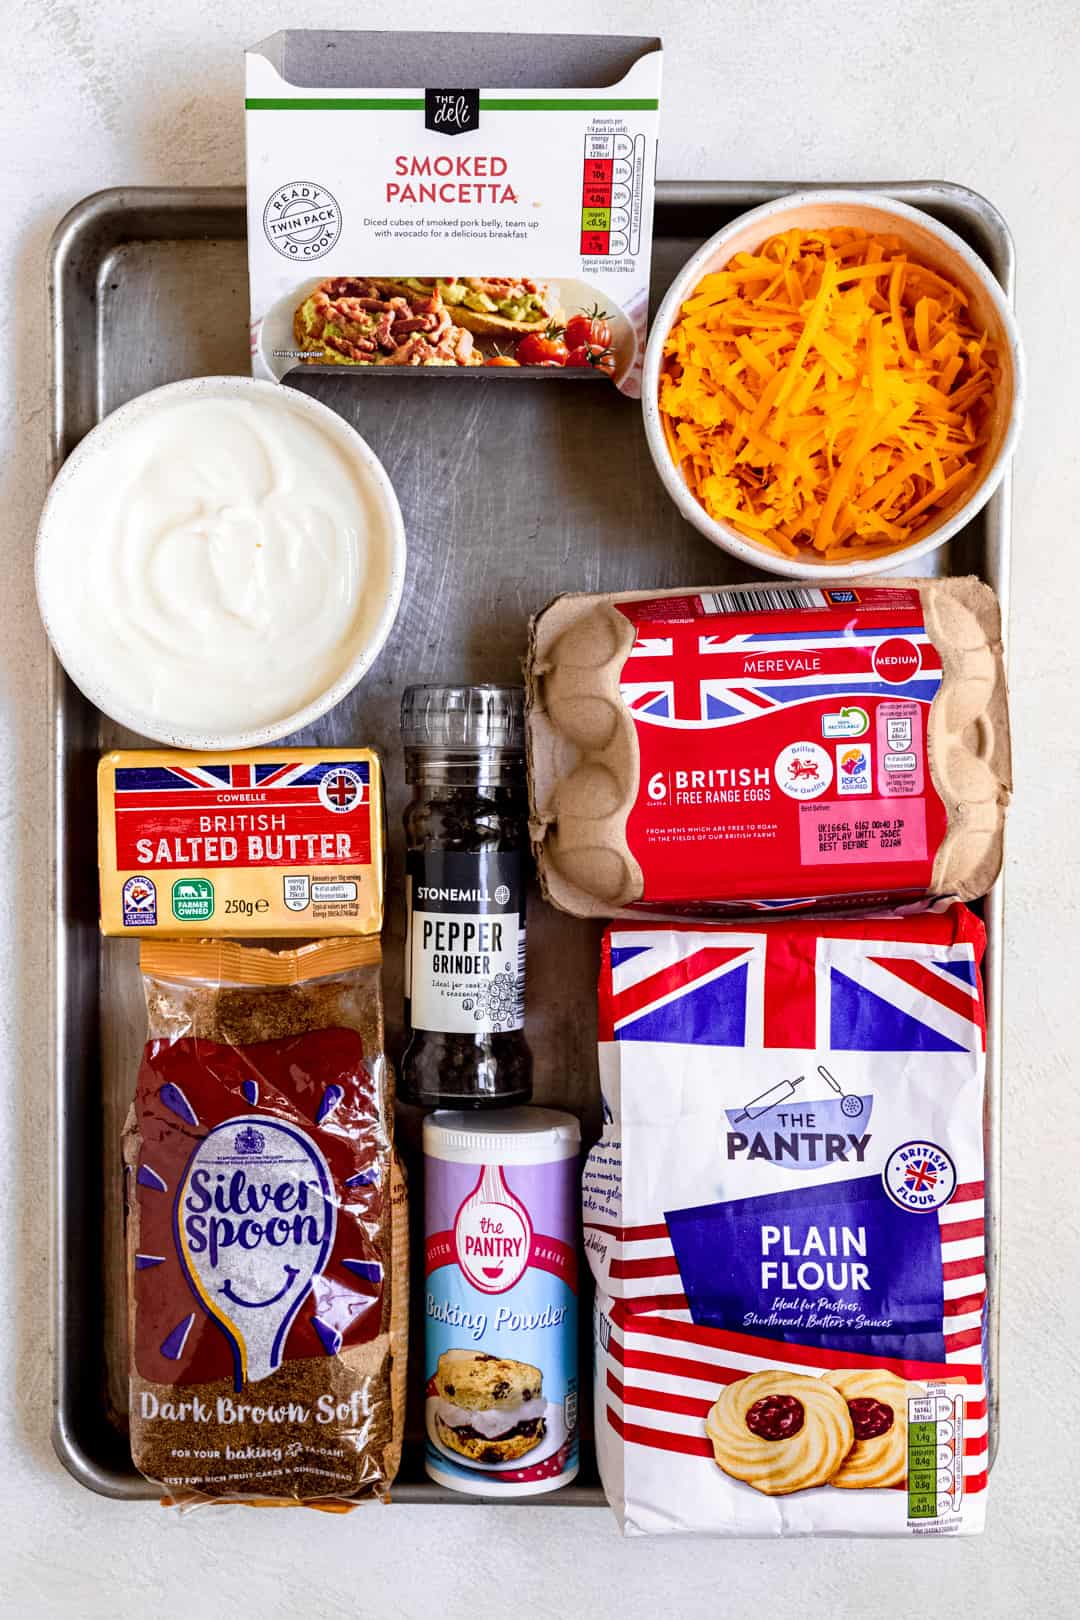 Aldi ingredients for making cheese and bacon scones.